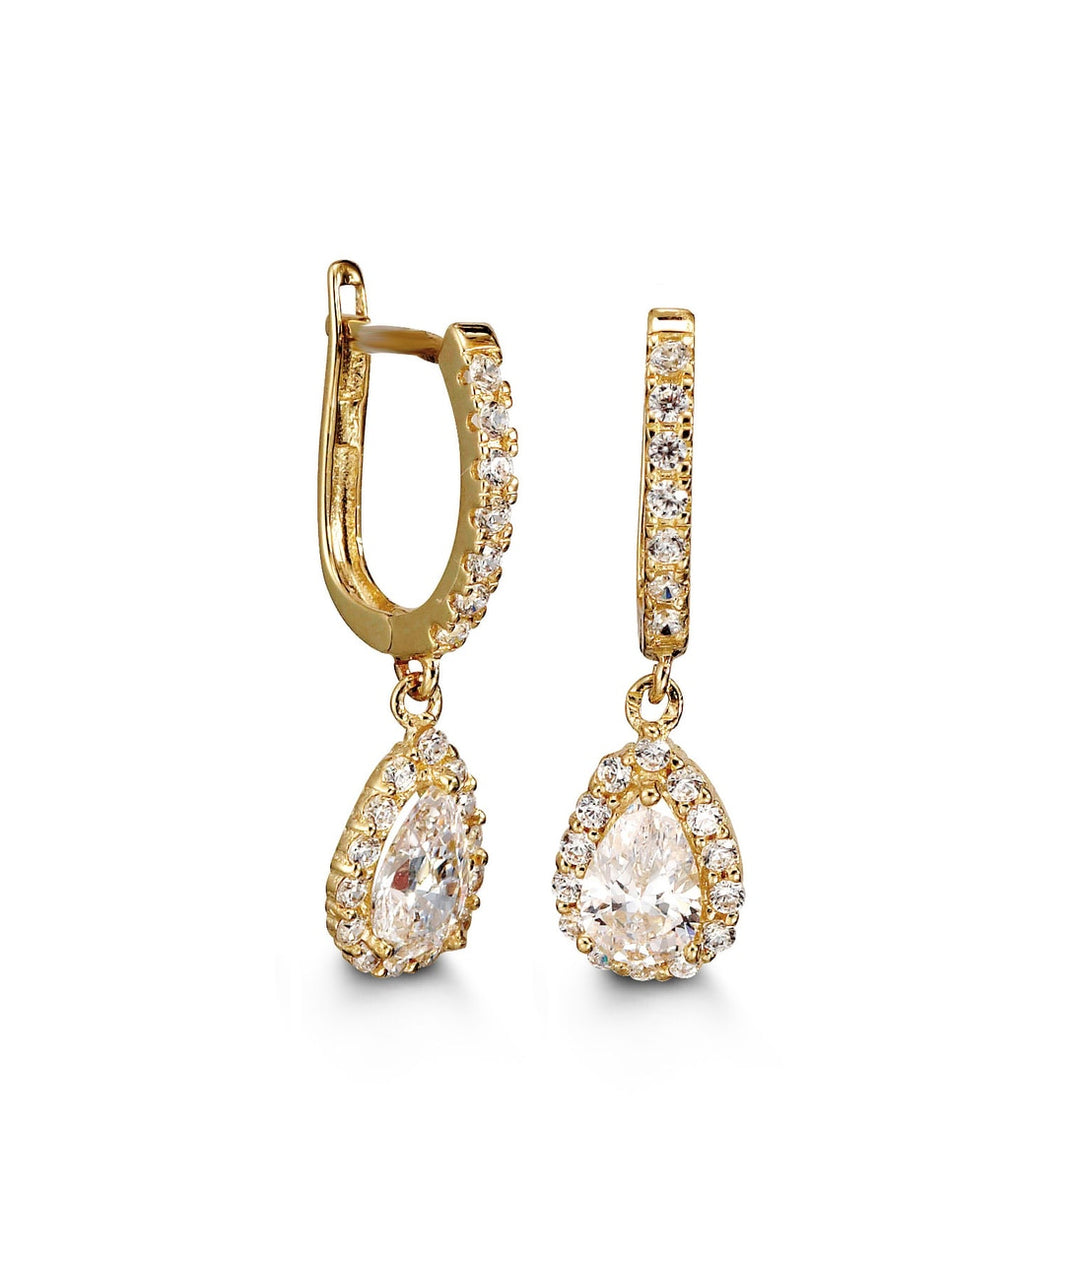 Luxury 10K yellow gold huggie earrings featuring a teardrop-shaped cubic zirconia drop surrounded by a halo of sparkling stones for an elegant finish.